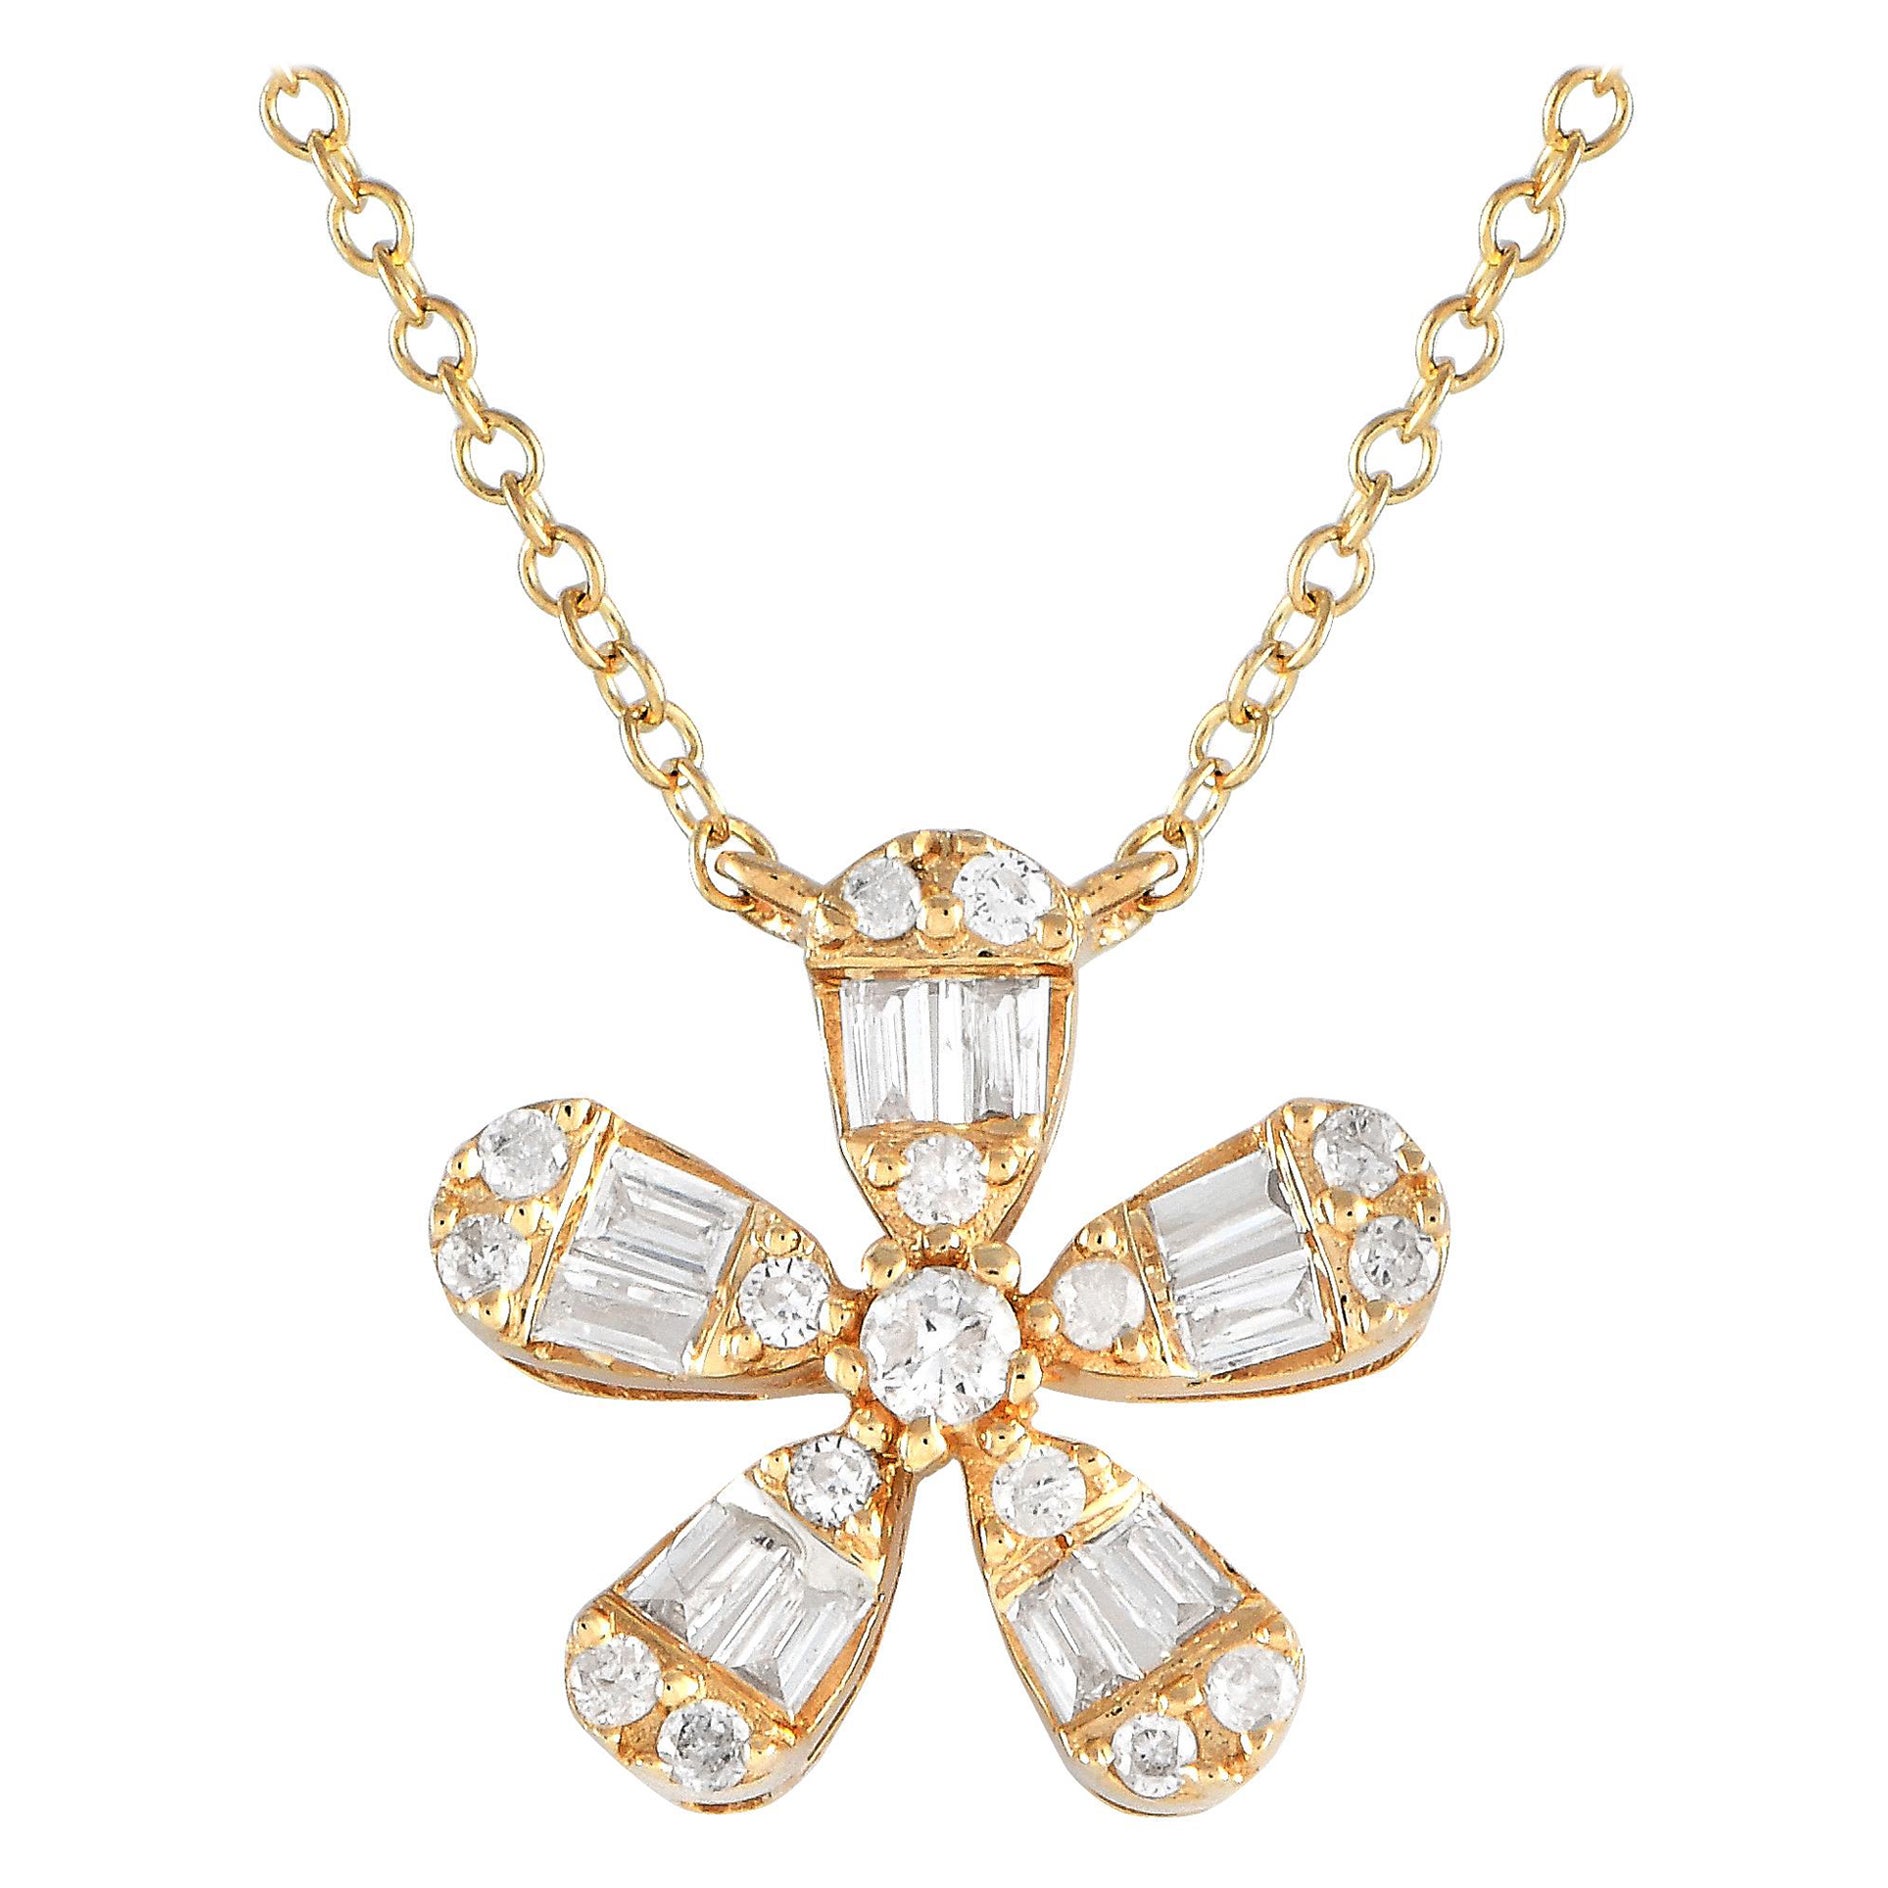 LB Exclusive 14K Yellow Gold 0.23ct Diamond Flower Necklace PN14995